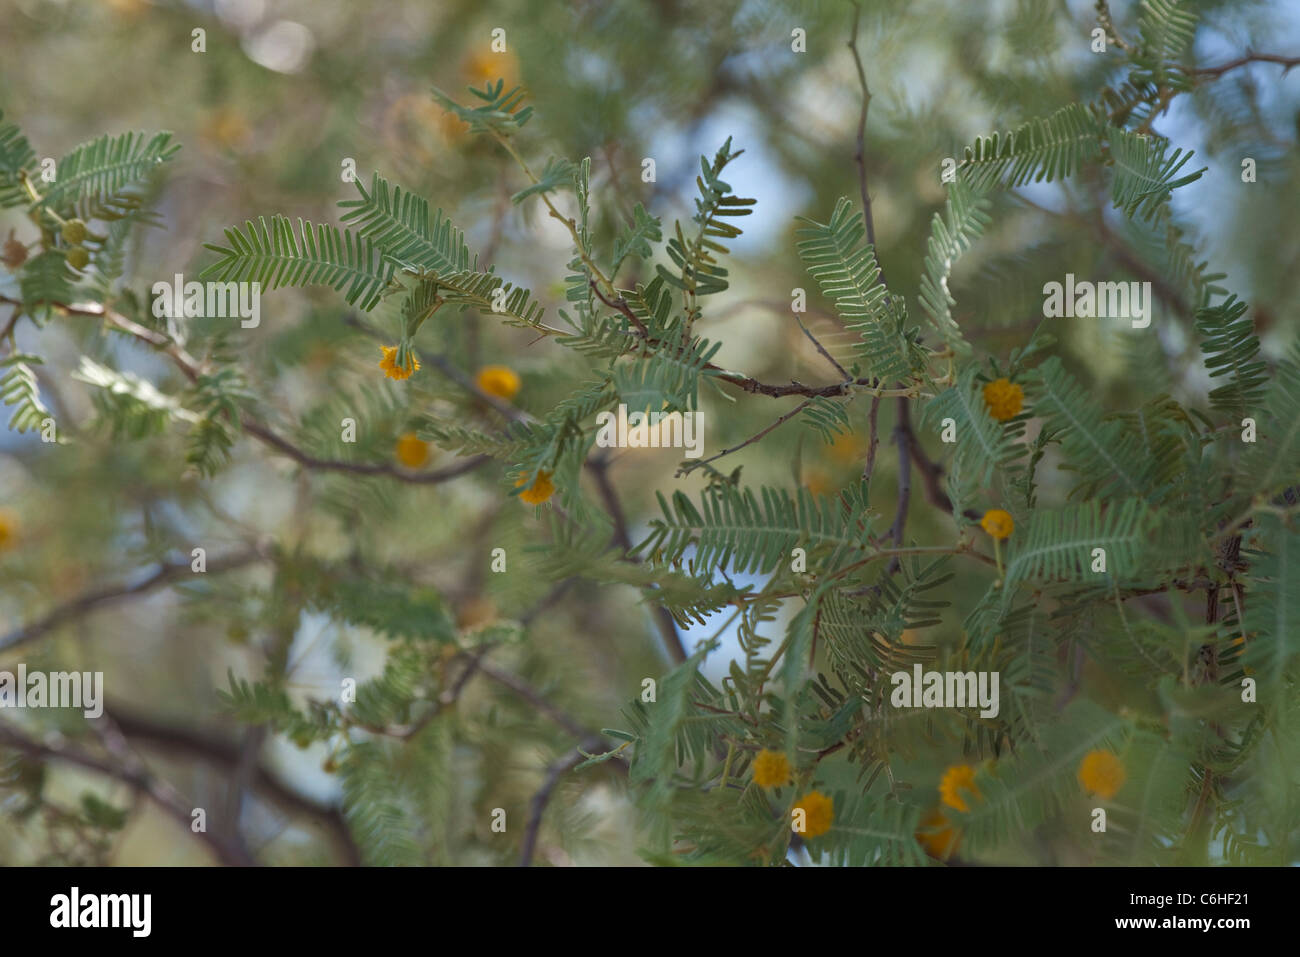 Detail of false camelthorn tree (Acacia haematoxylon) showing leaves and flowers Stock Photo